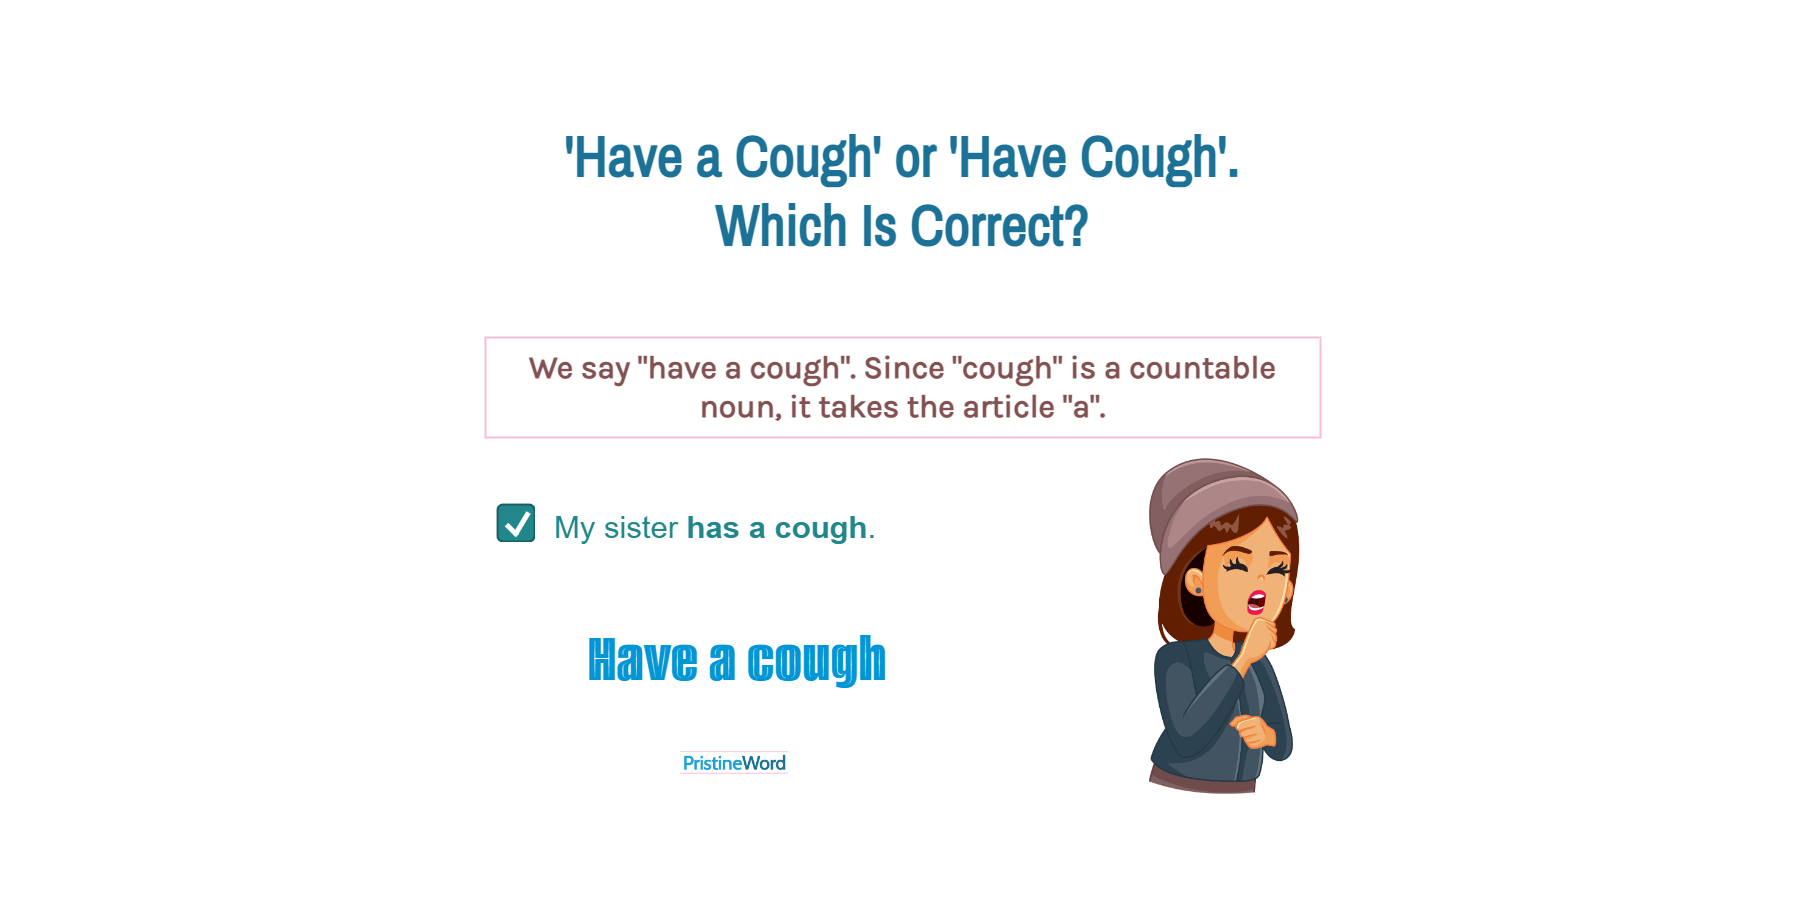 Have a Cough or Have Cough. Which Is Correct?